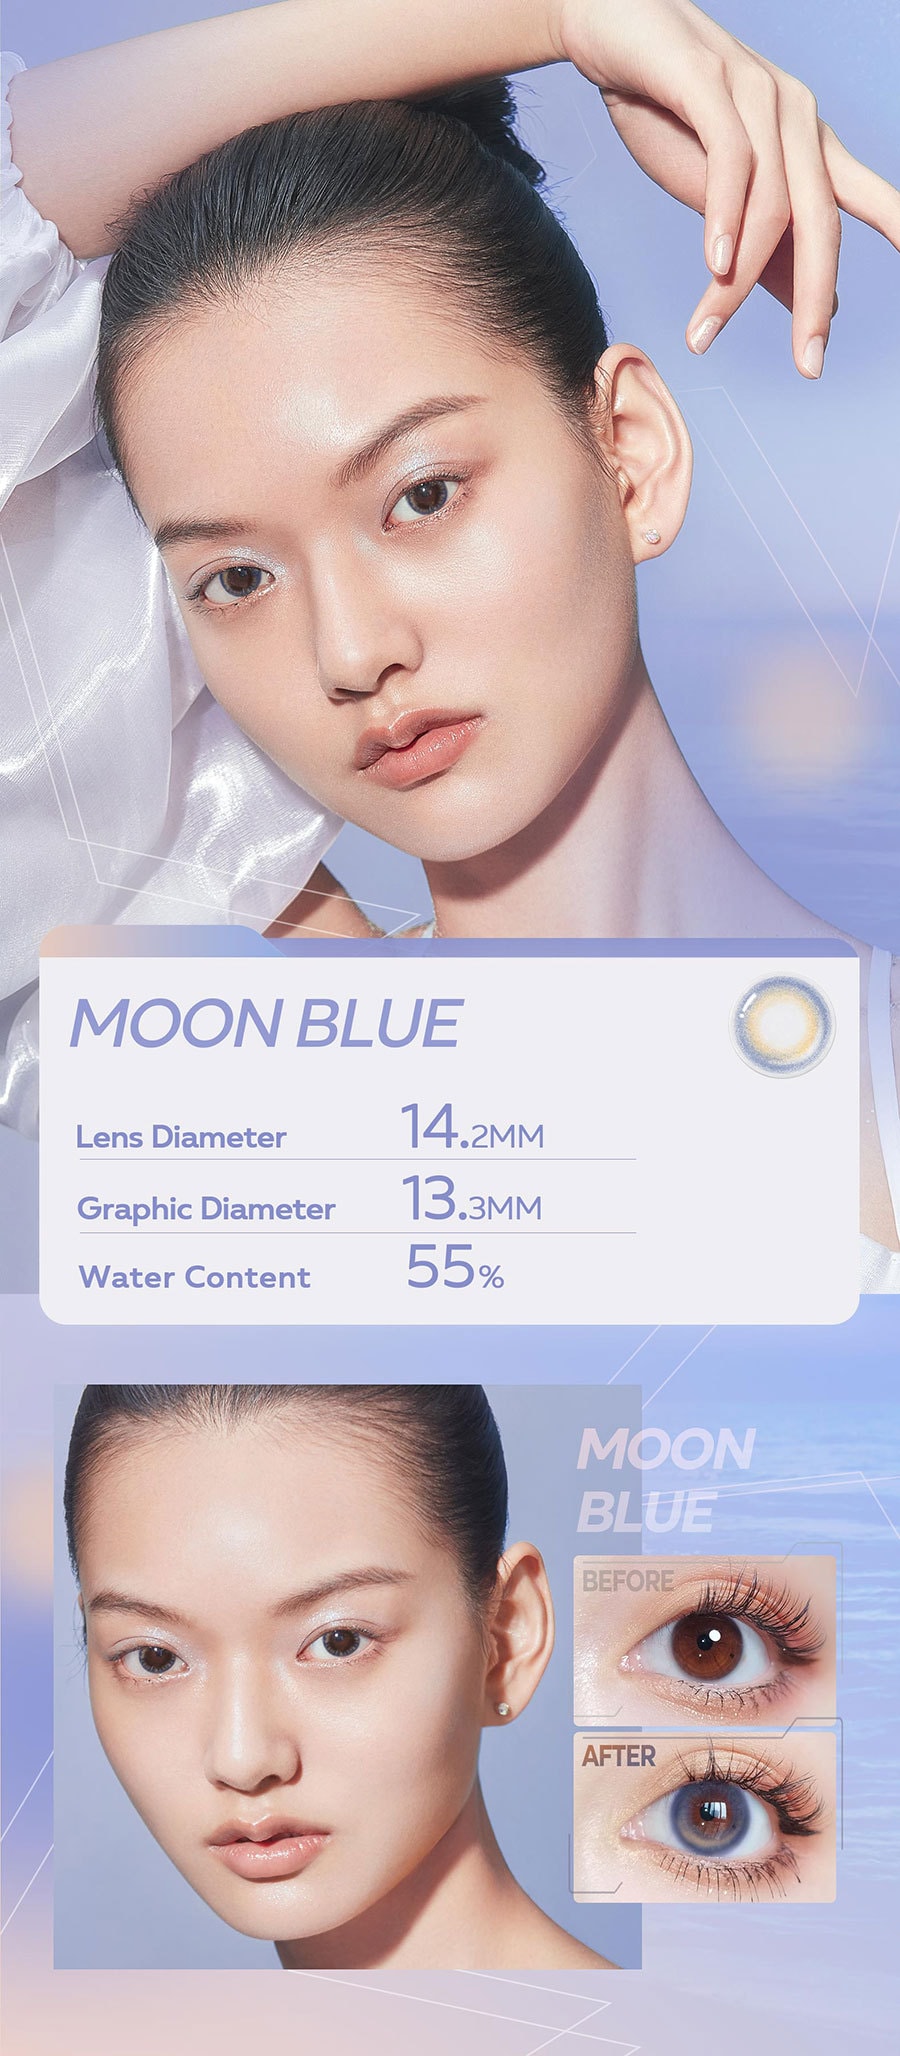 CoFANCY Highlight Moment Collection Daily Colored Contacts (10pcs/box)#Moon Blue, -6.50(650)